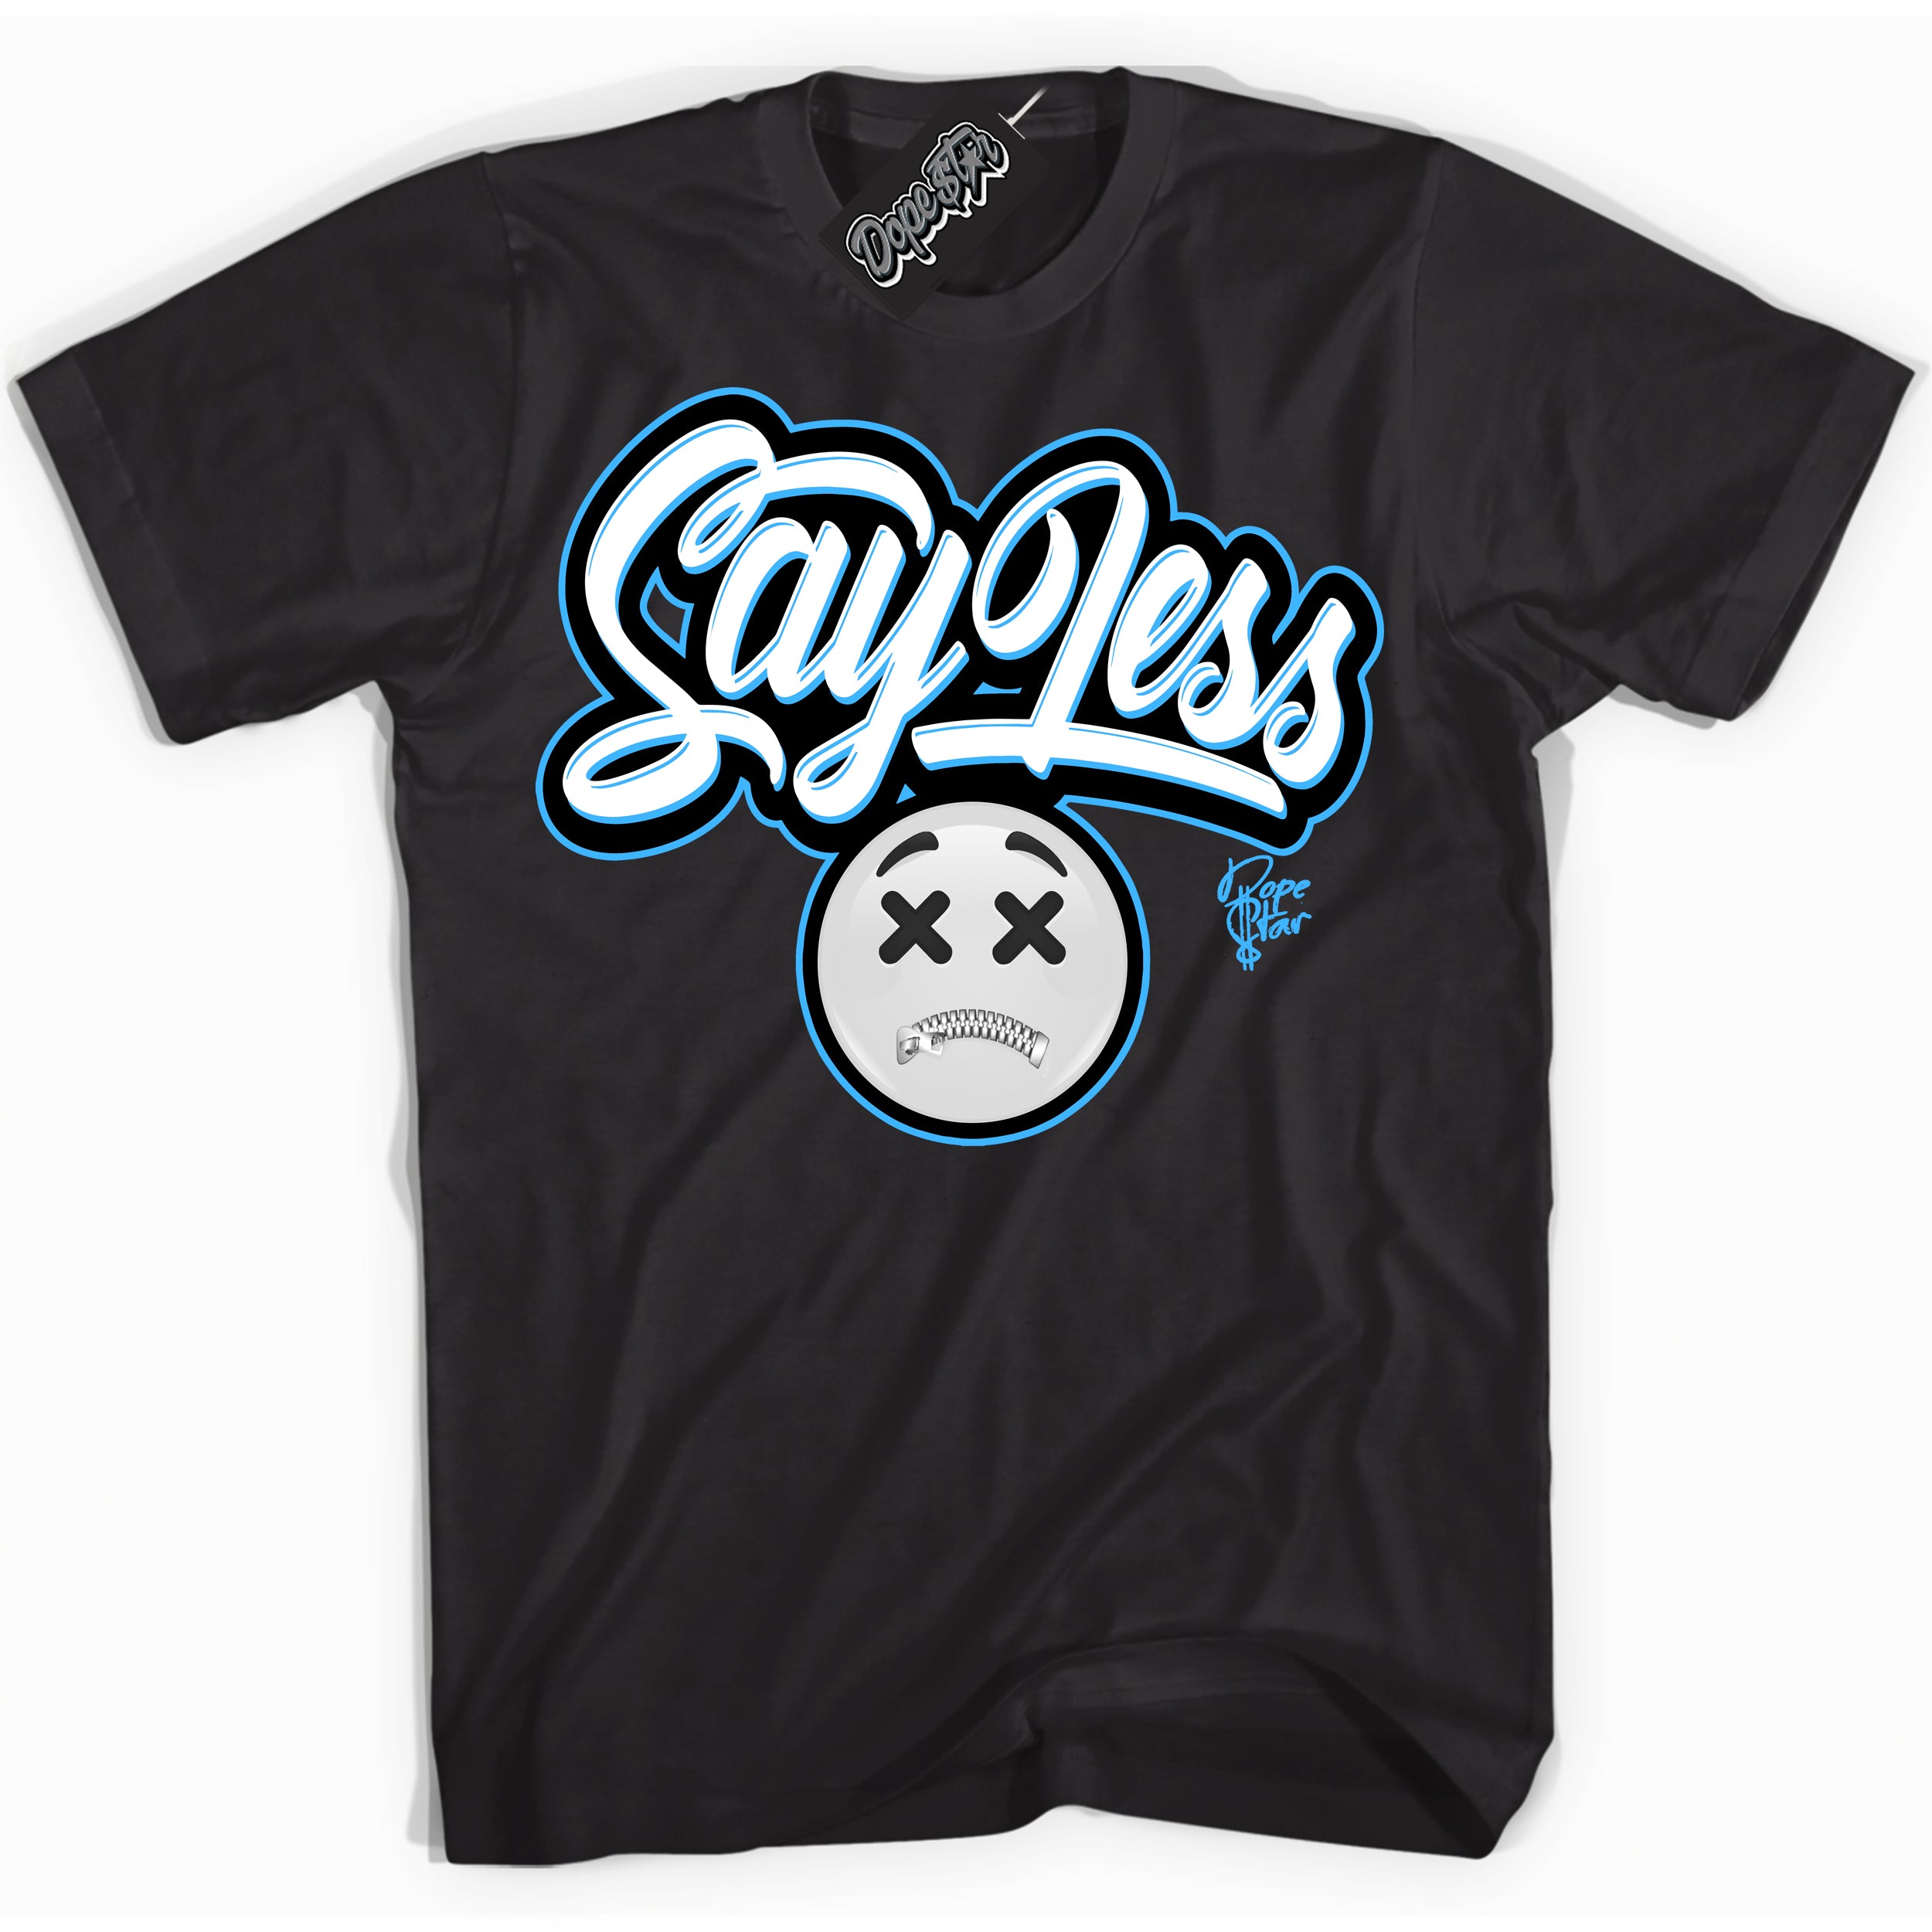 Cool Black graphic tee with “ Say Less ” design, that perfectly matches Powder Blue 9s sneakers 